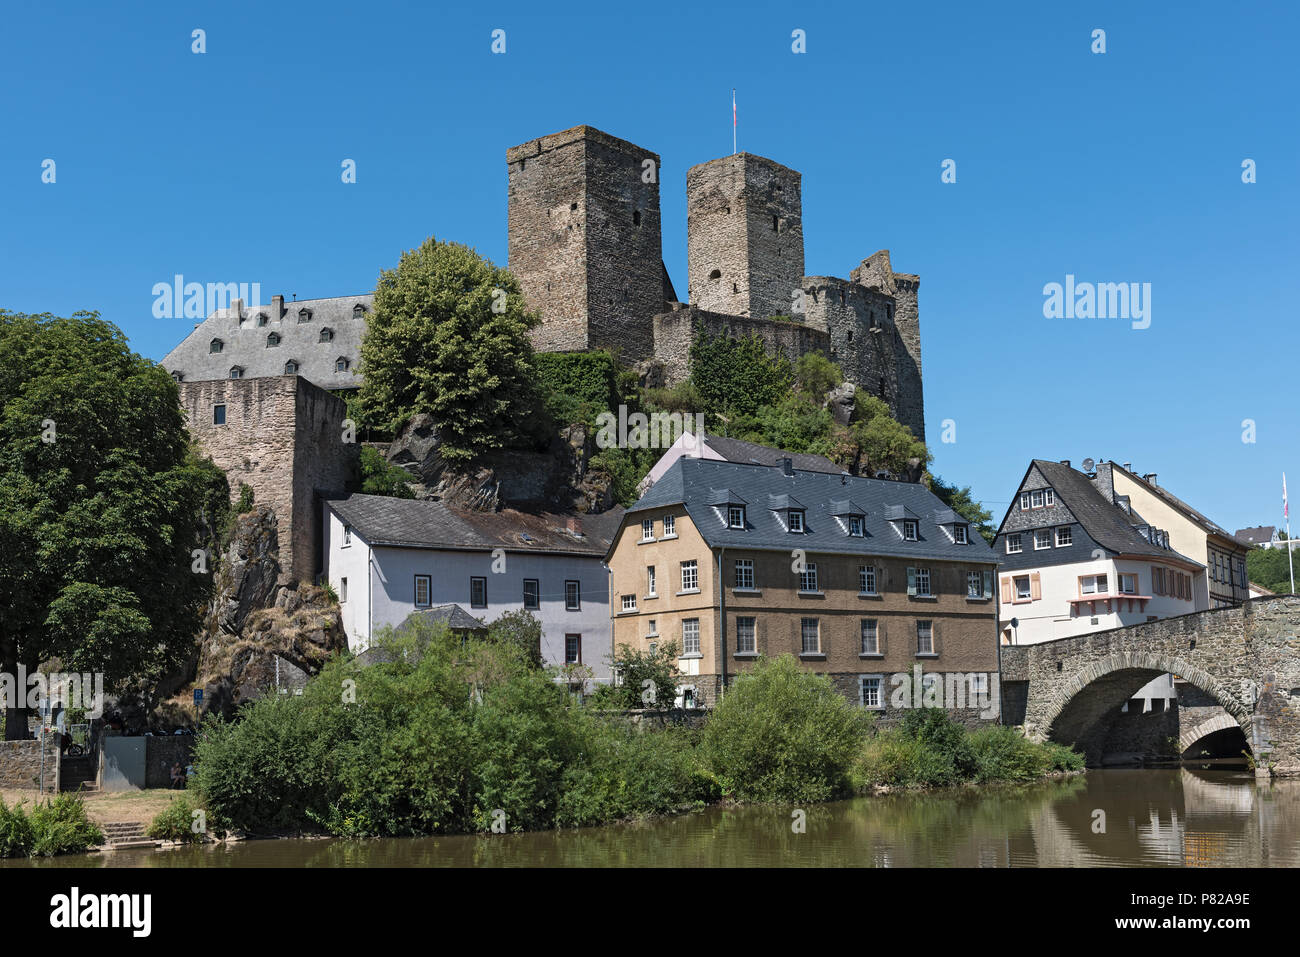 The castle of Runkel and the historic old town on the Lahn River, Hesse, Germany Stock Photo